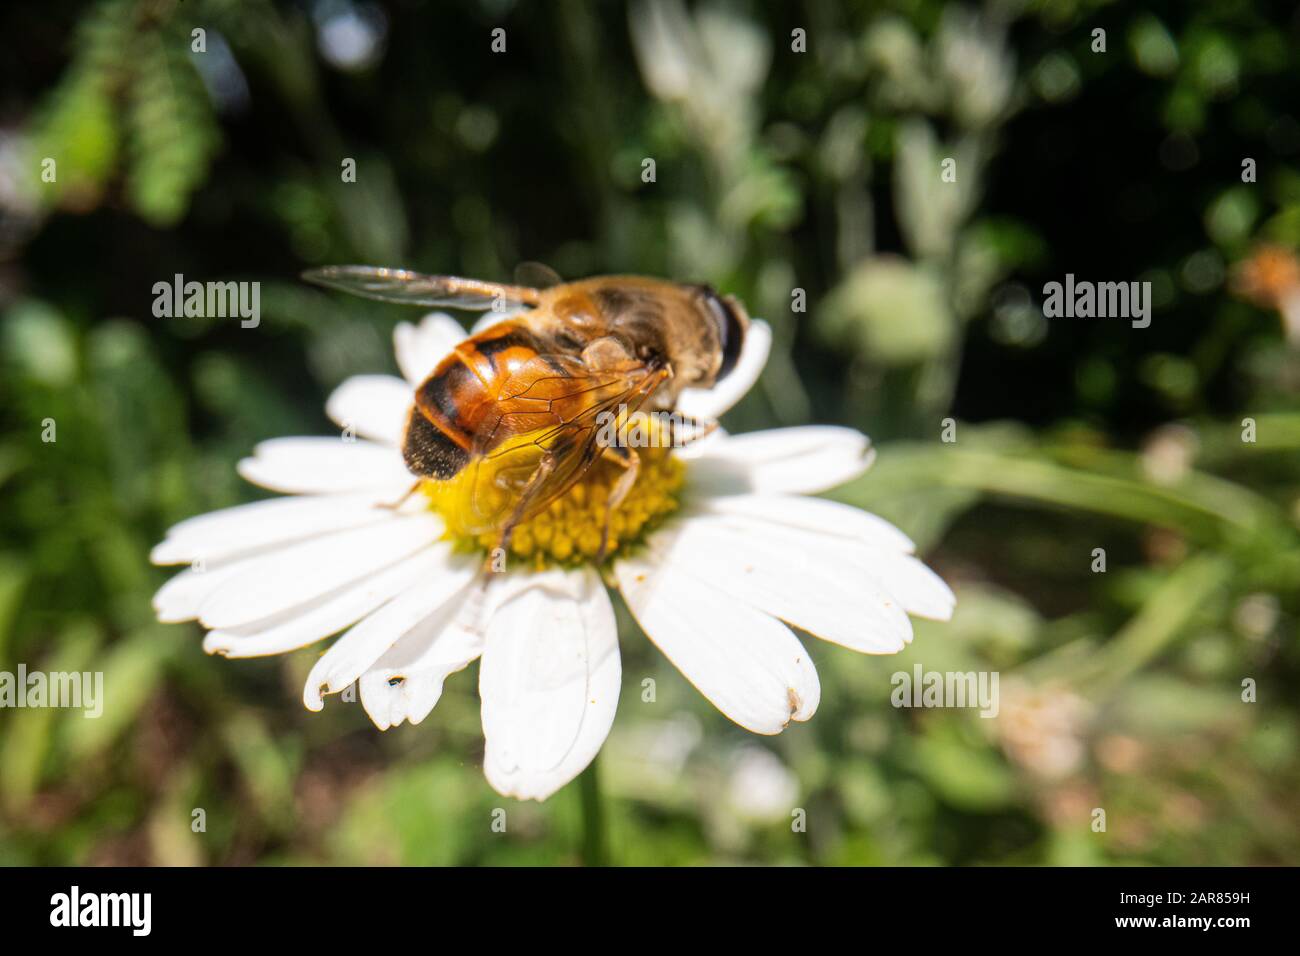 fly on a beautiful flower with nature background, super macro photography of an insect on flower Stock Photo